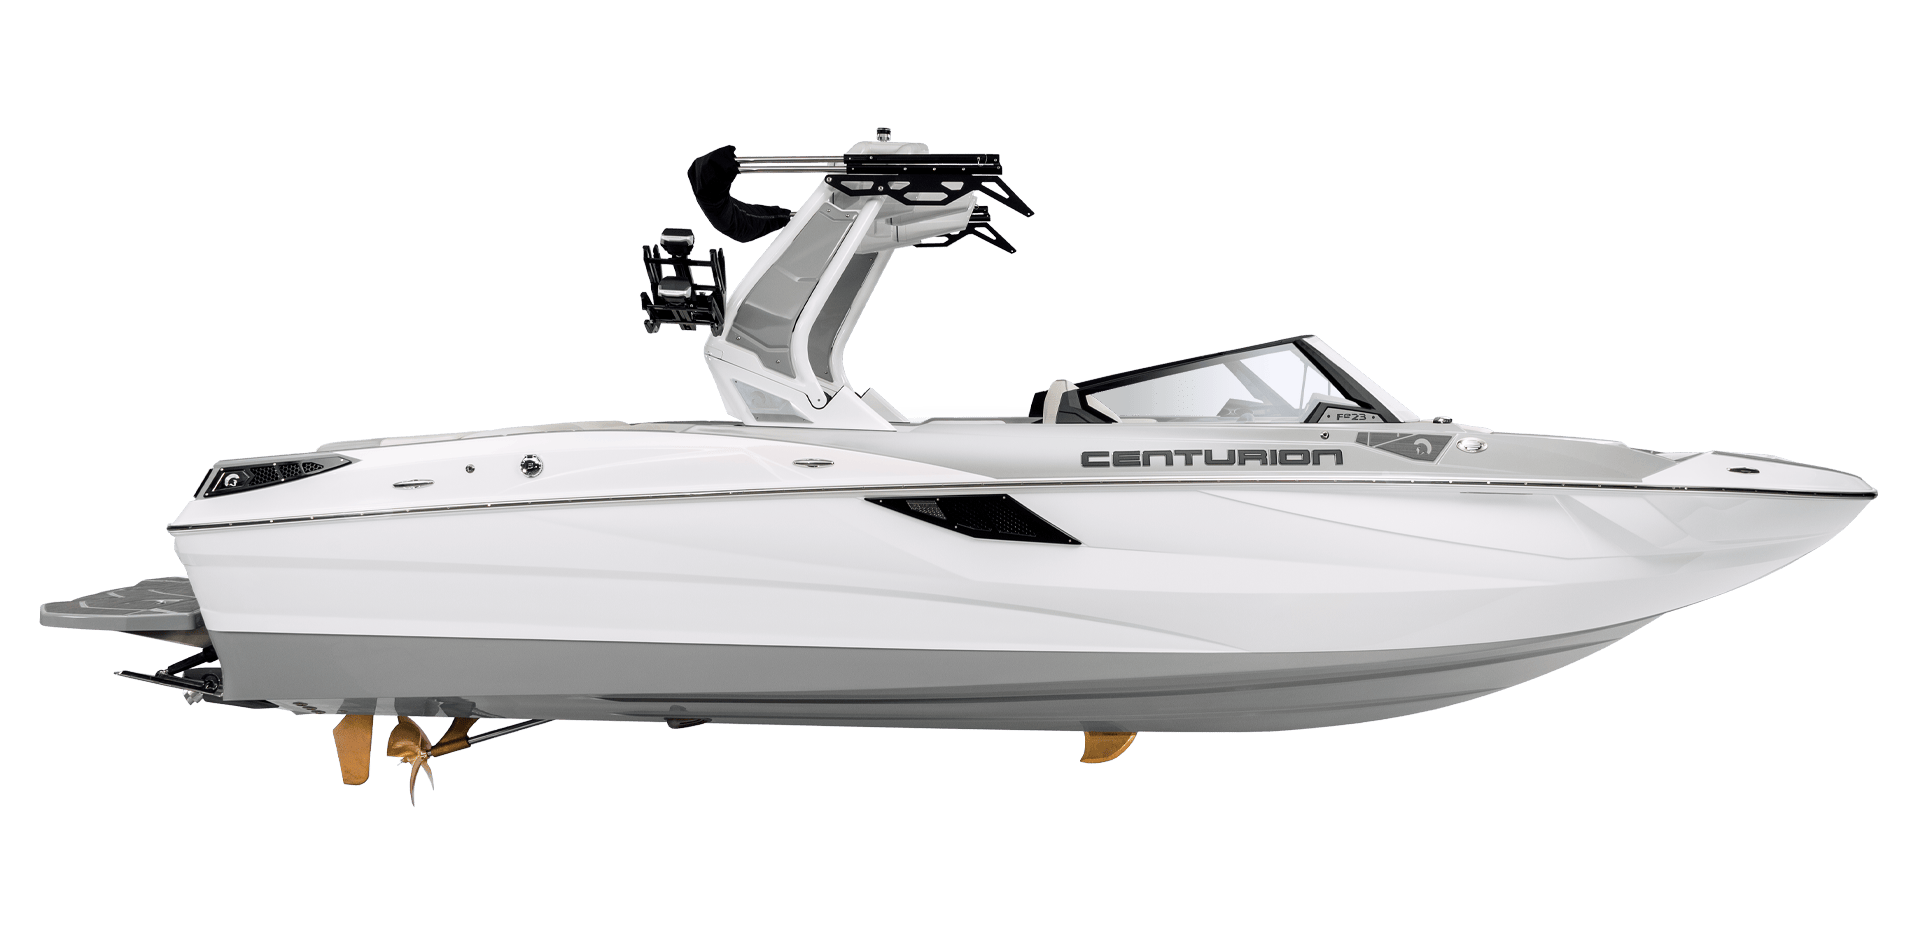 Side view of a white Centurion motorboat with a sleek design and modern features, including a wakeboard tower. The boat is elevated on stands.